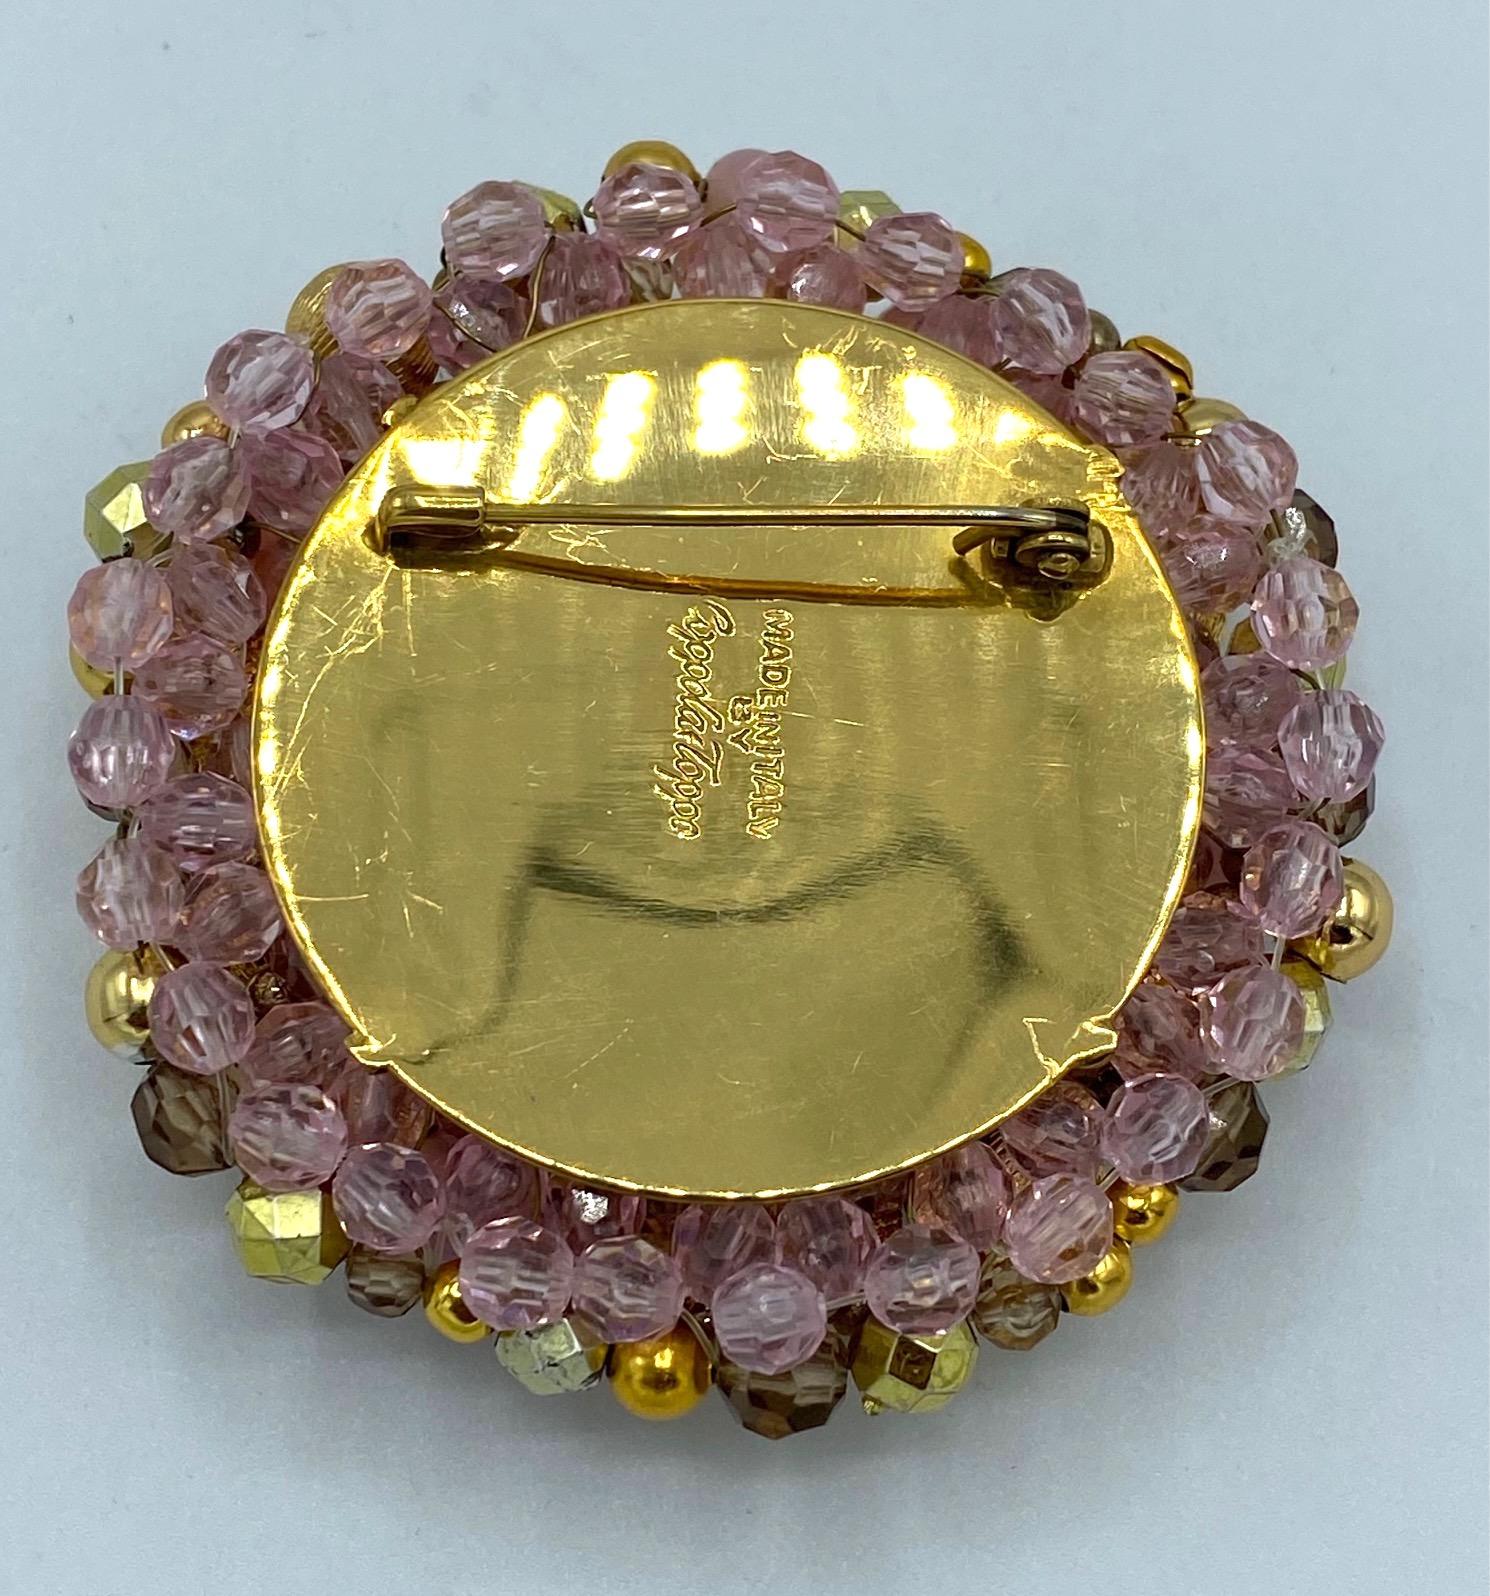 Coppola e Toppo 1960s Gold, Amber & Pink Bead Brooch 4